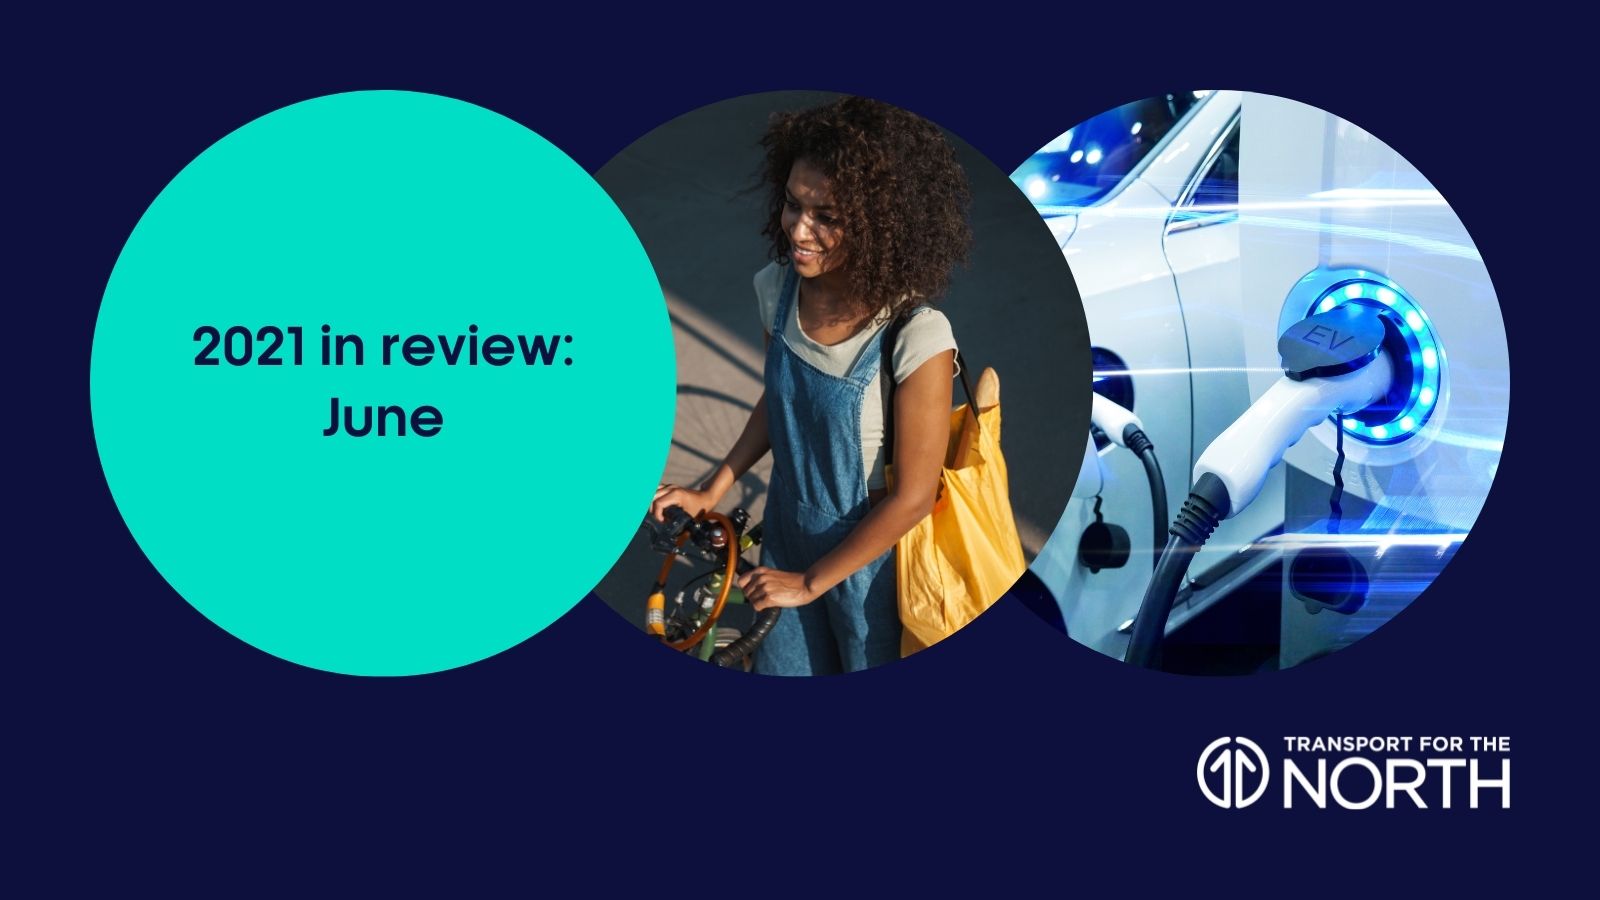 June review 2021 woman with bike and EV charging